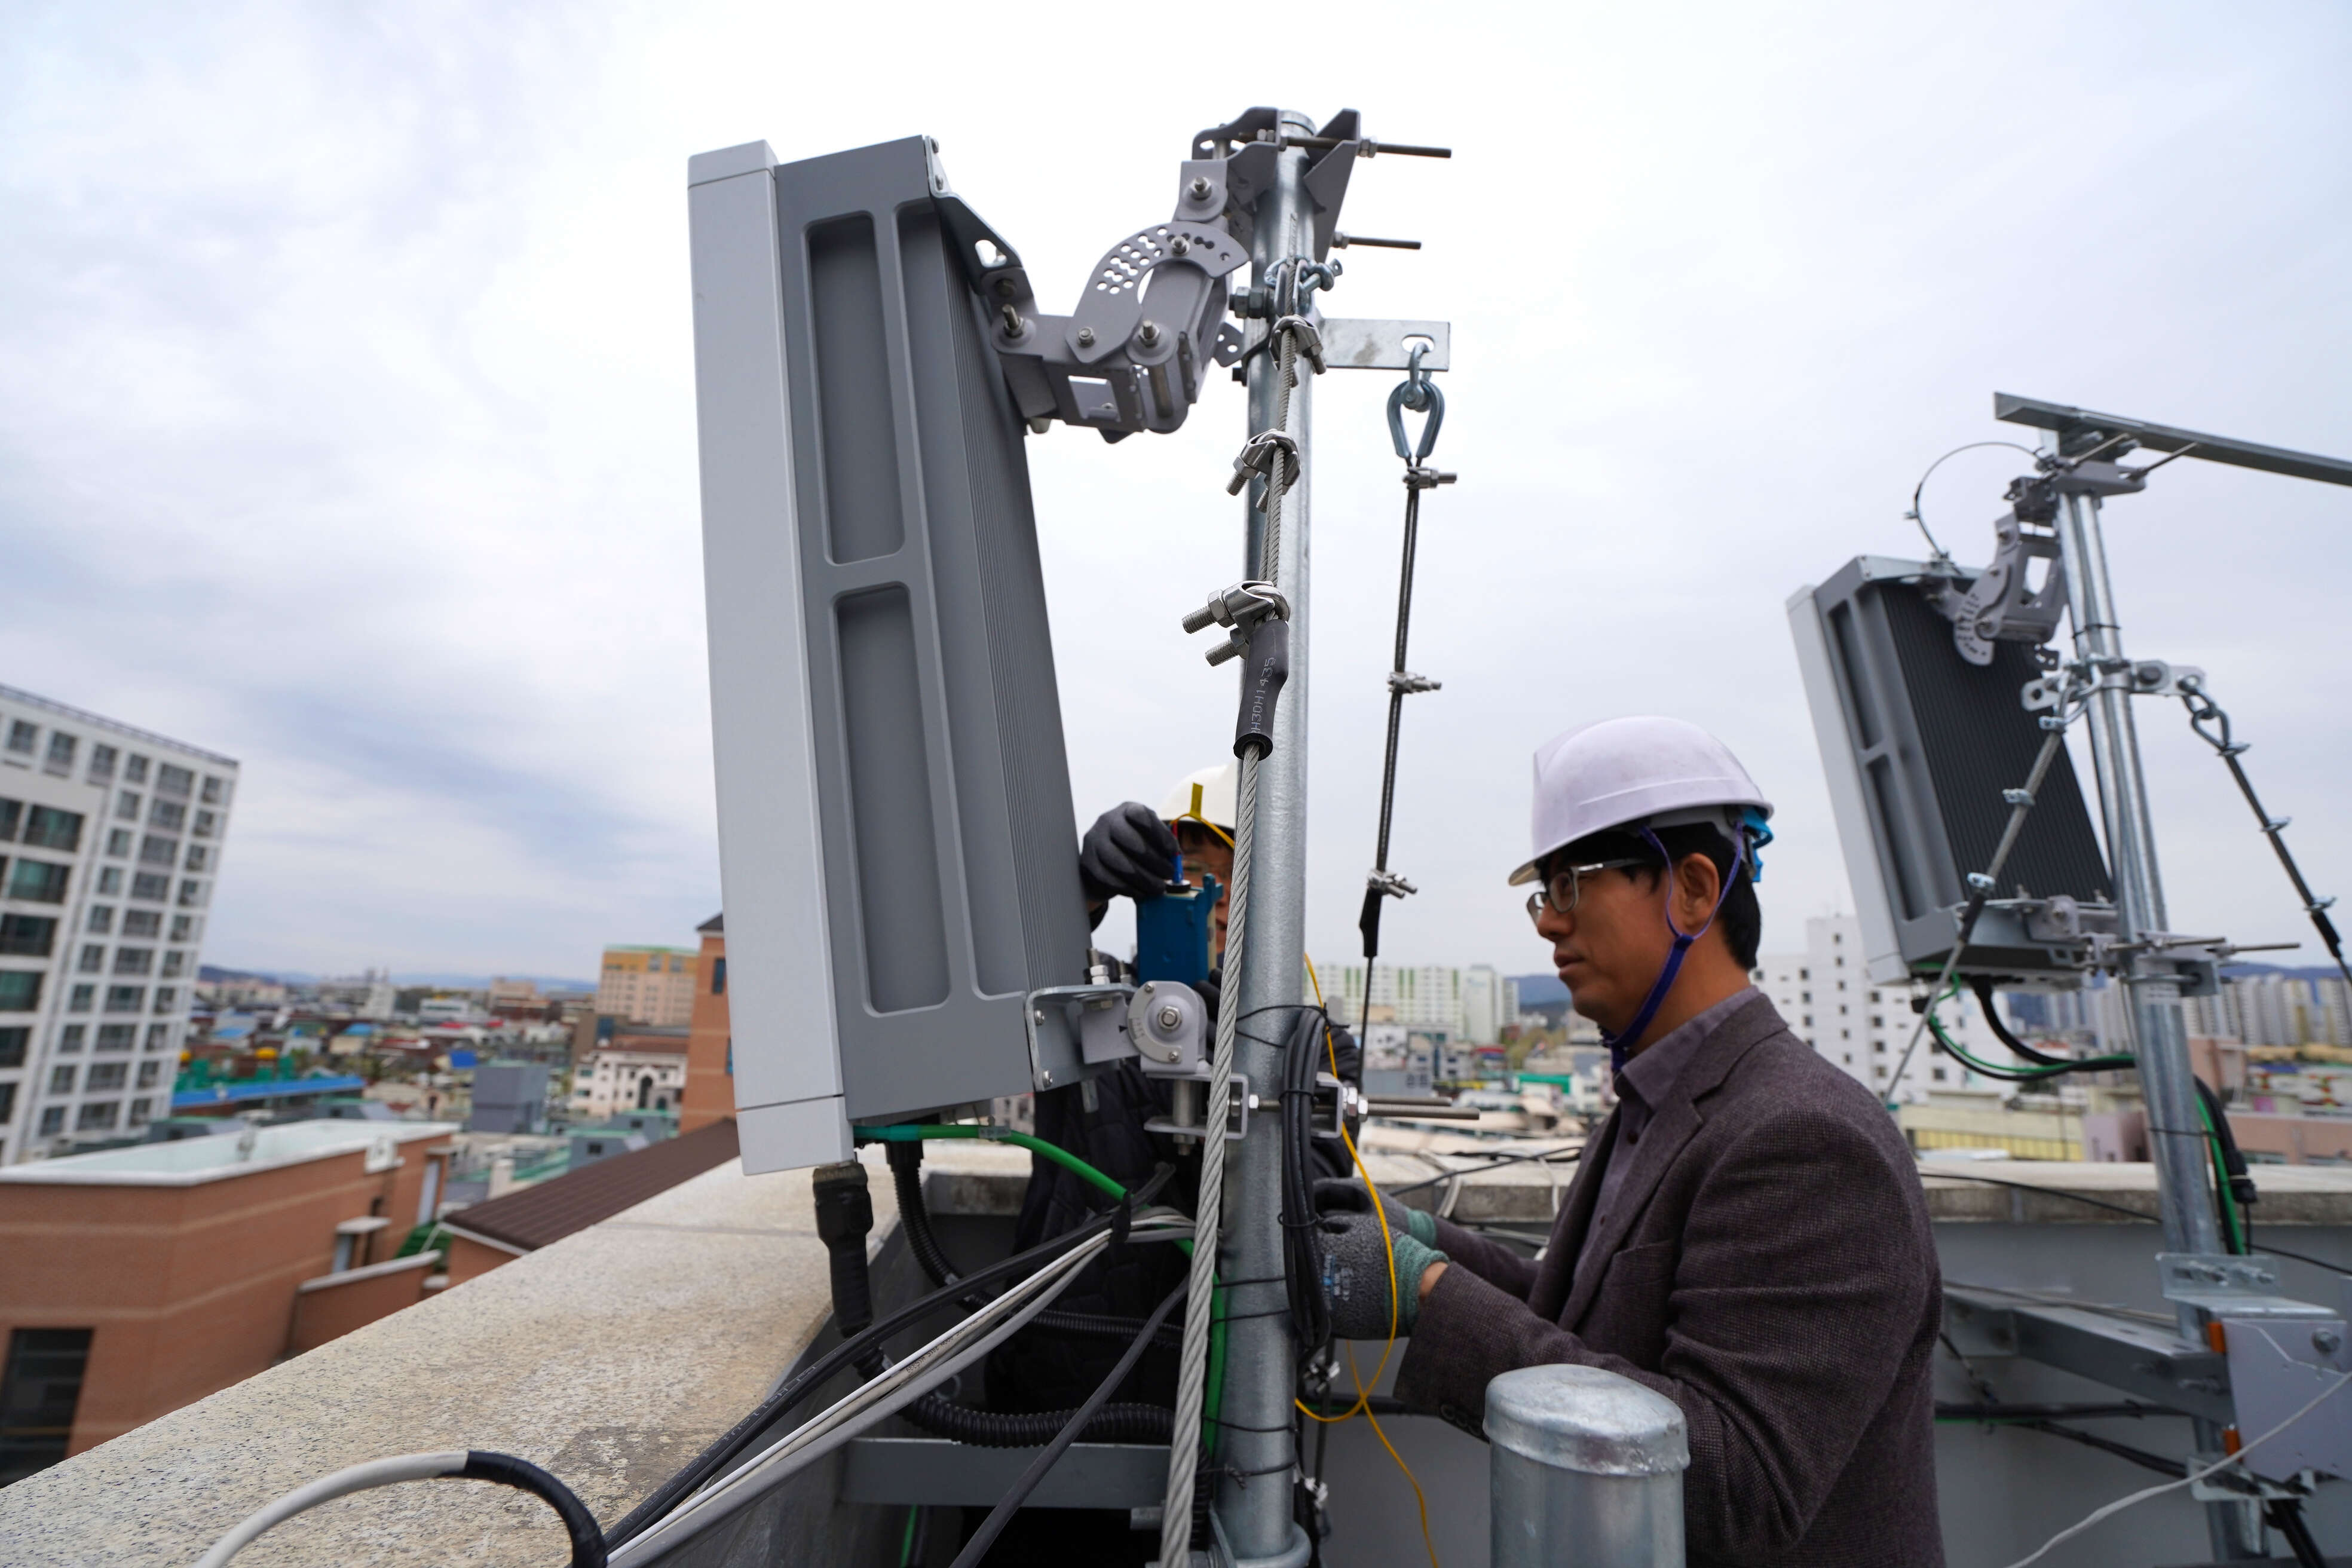 Ericsson engineers installing 5G radios in South Korea - Ericsson shows leadership in the 5G networking equipment market